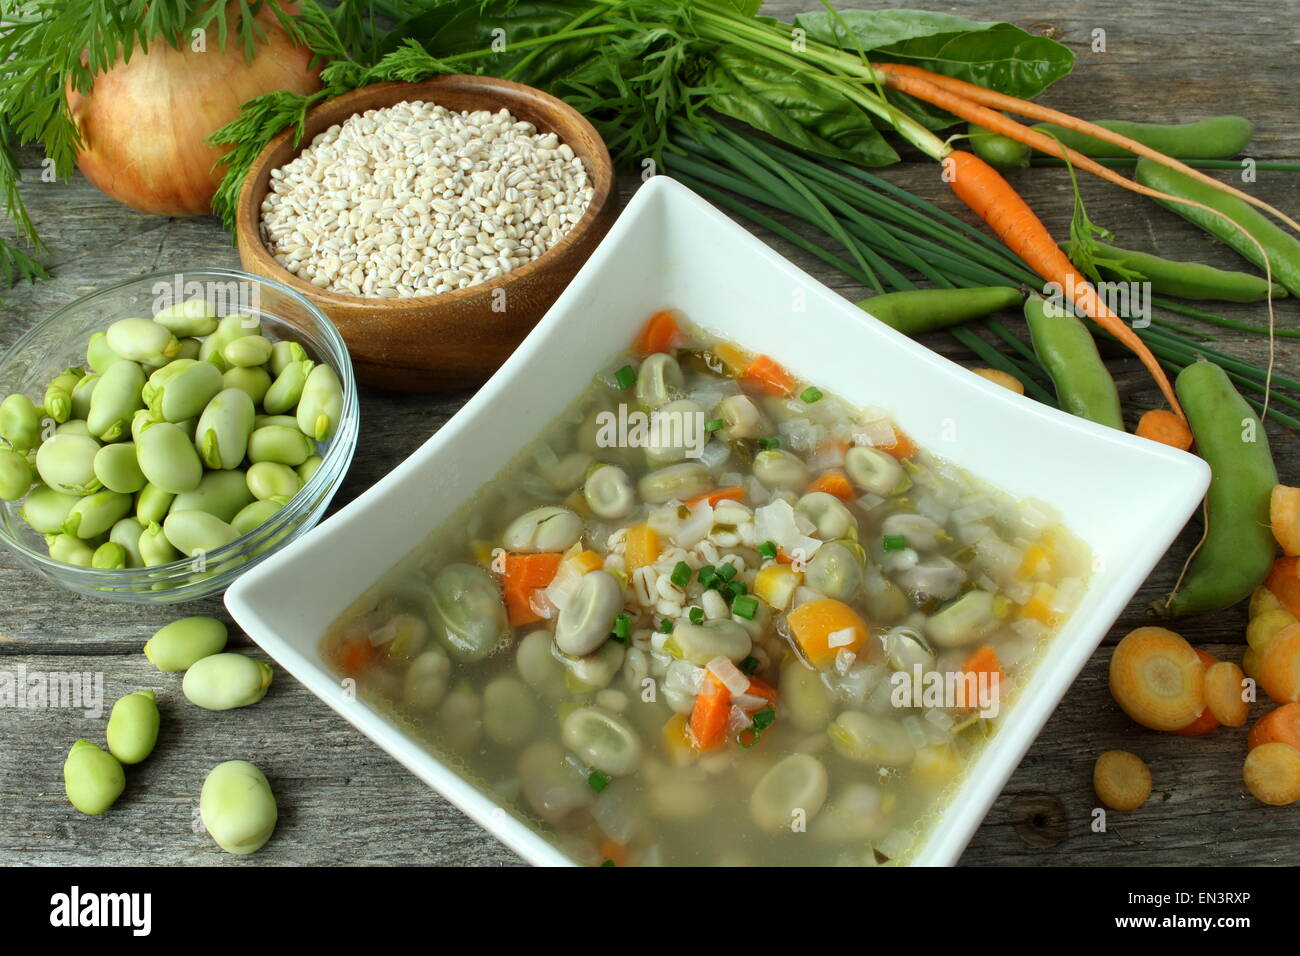 Traditional fava bean soup made with garden vegetables, lac St-Jean, Quebec, Canada Stock Photo